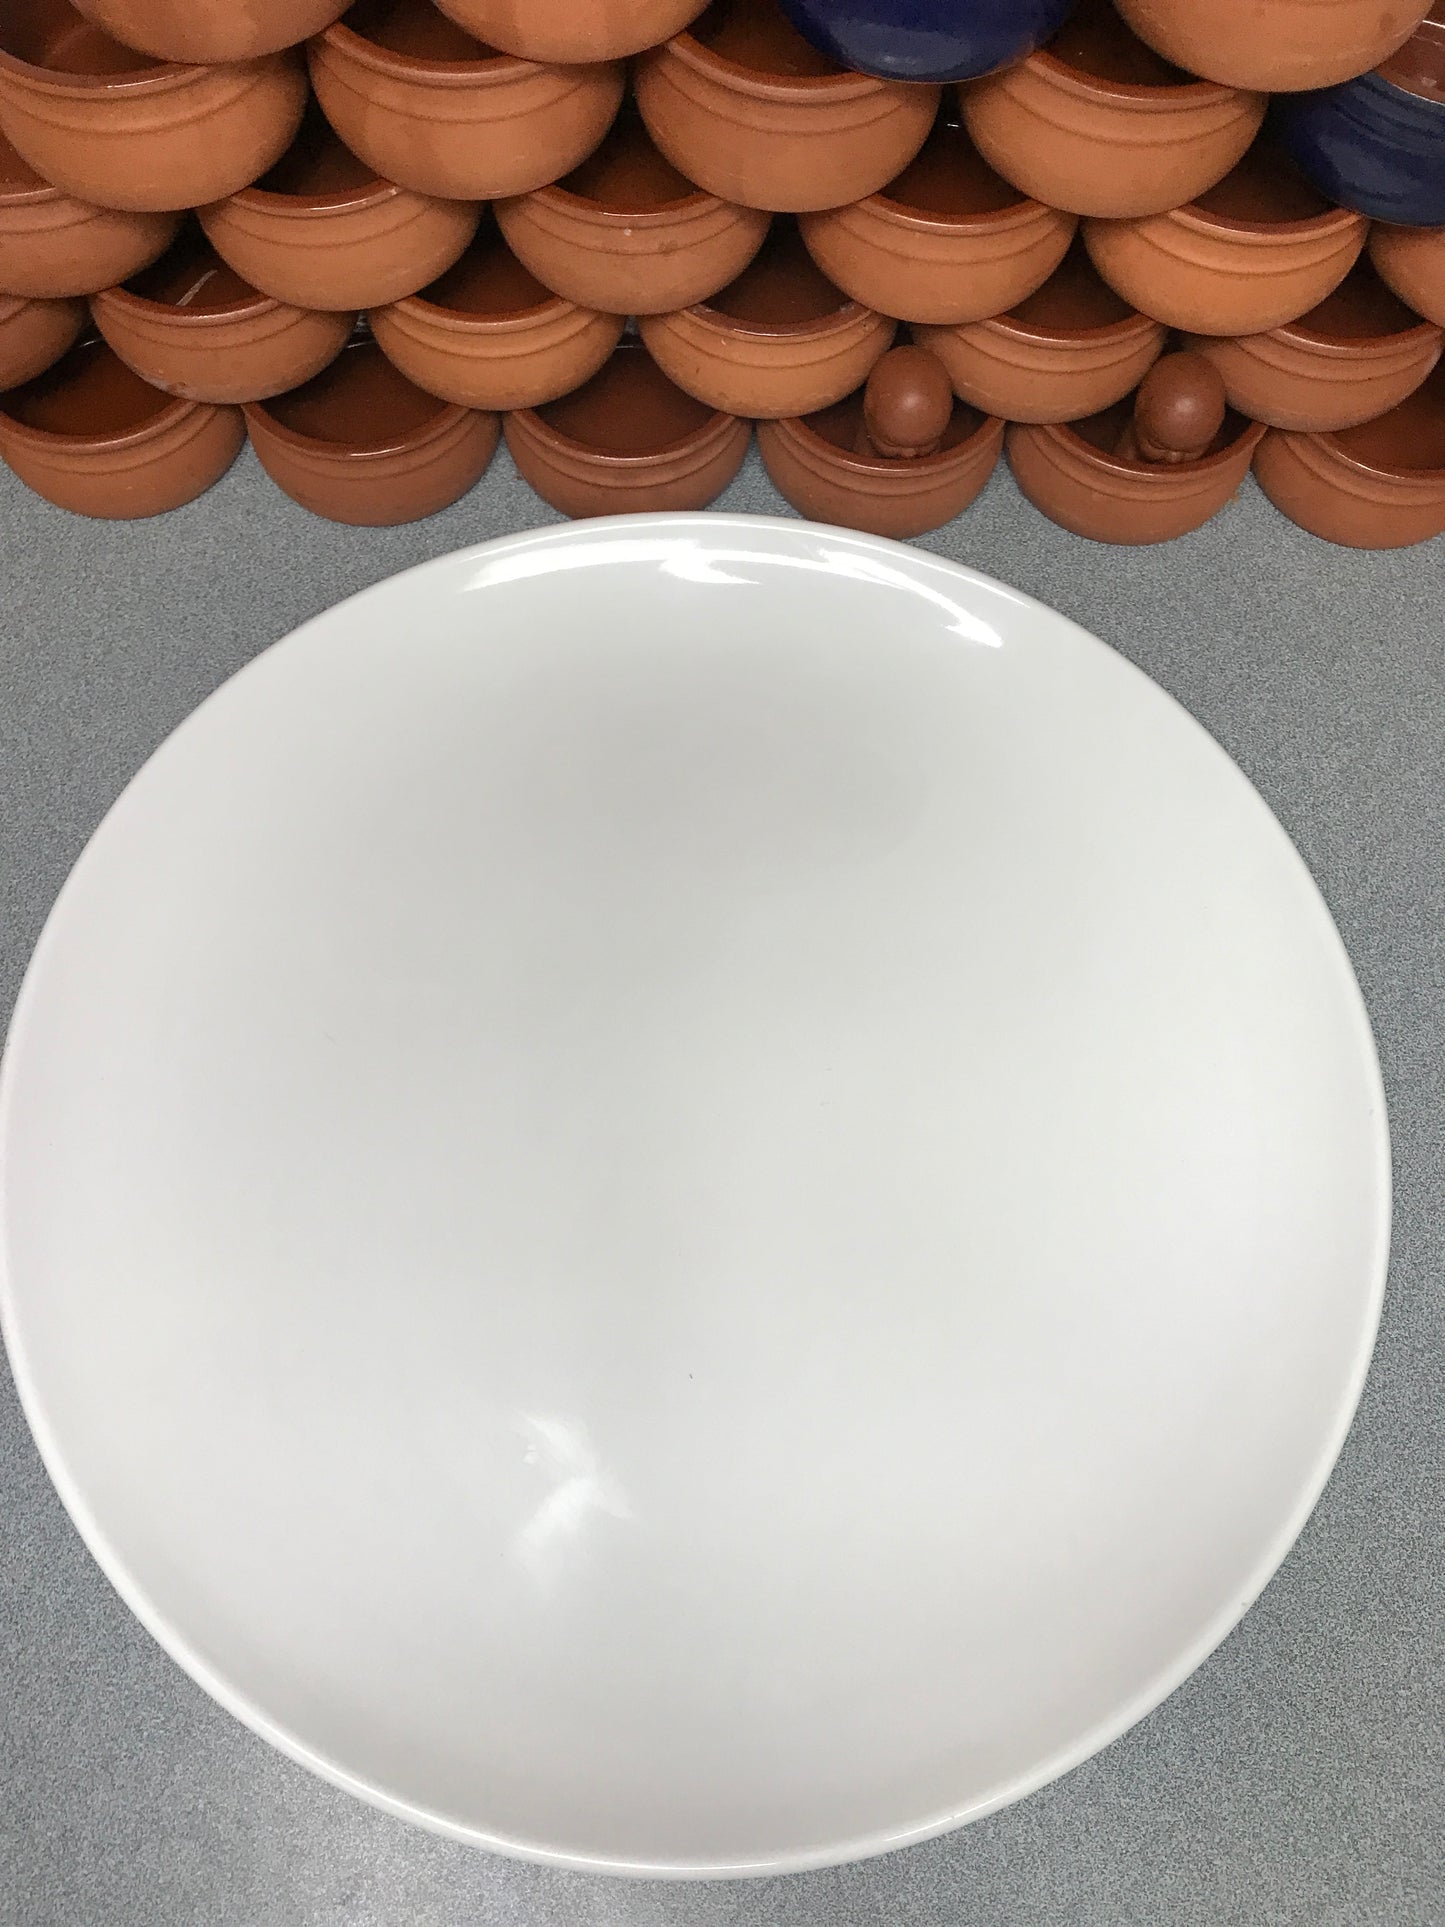 2 x Melamine Plates 45cm Great for Christmas, Parties, BBQ and Breakfast In Bed